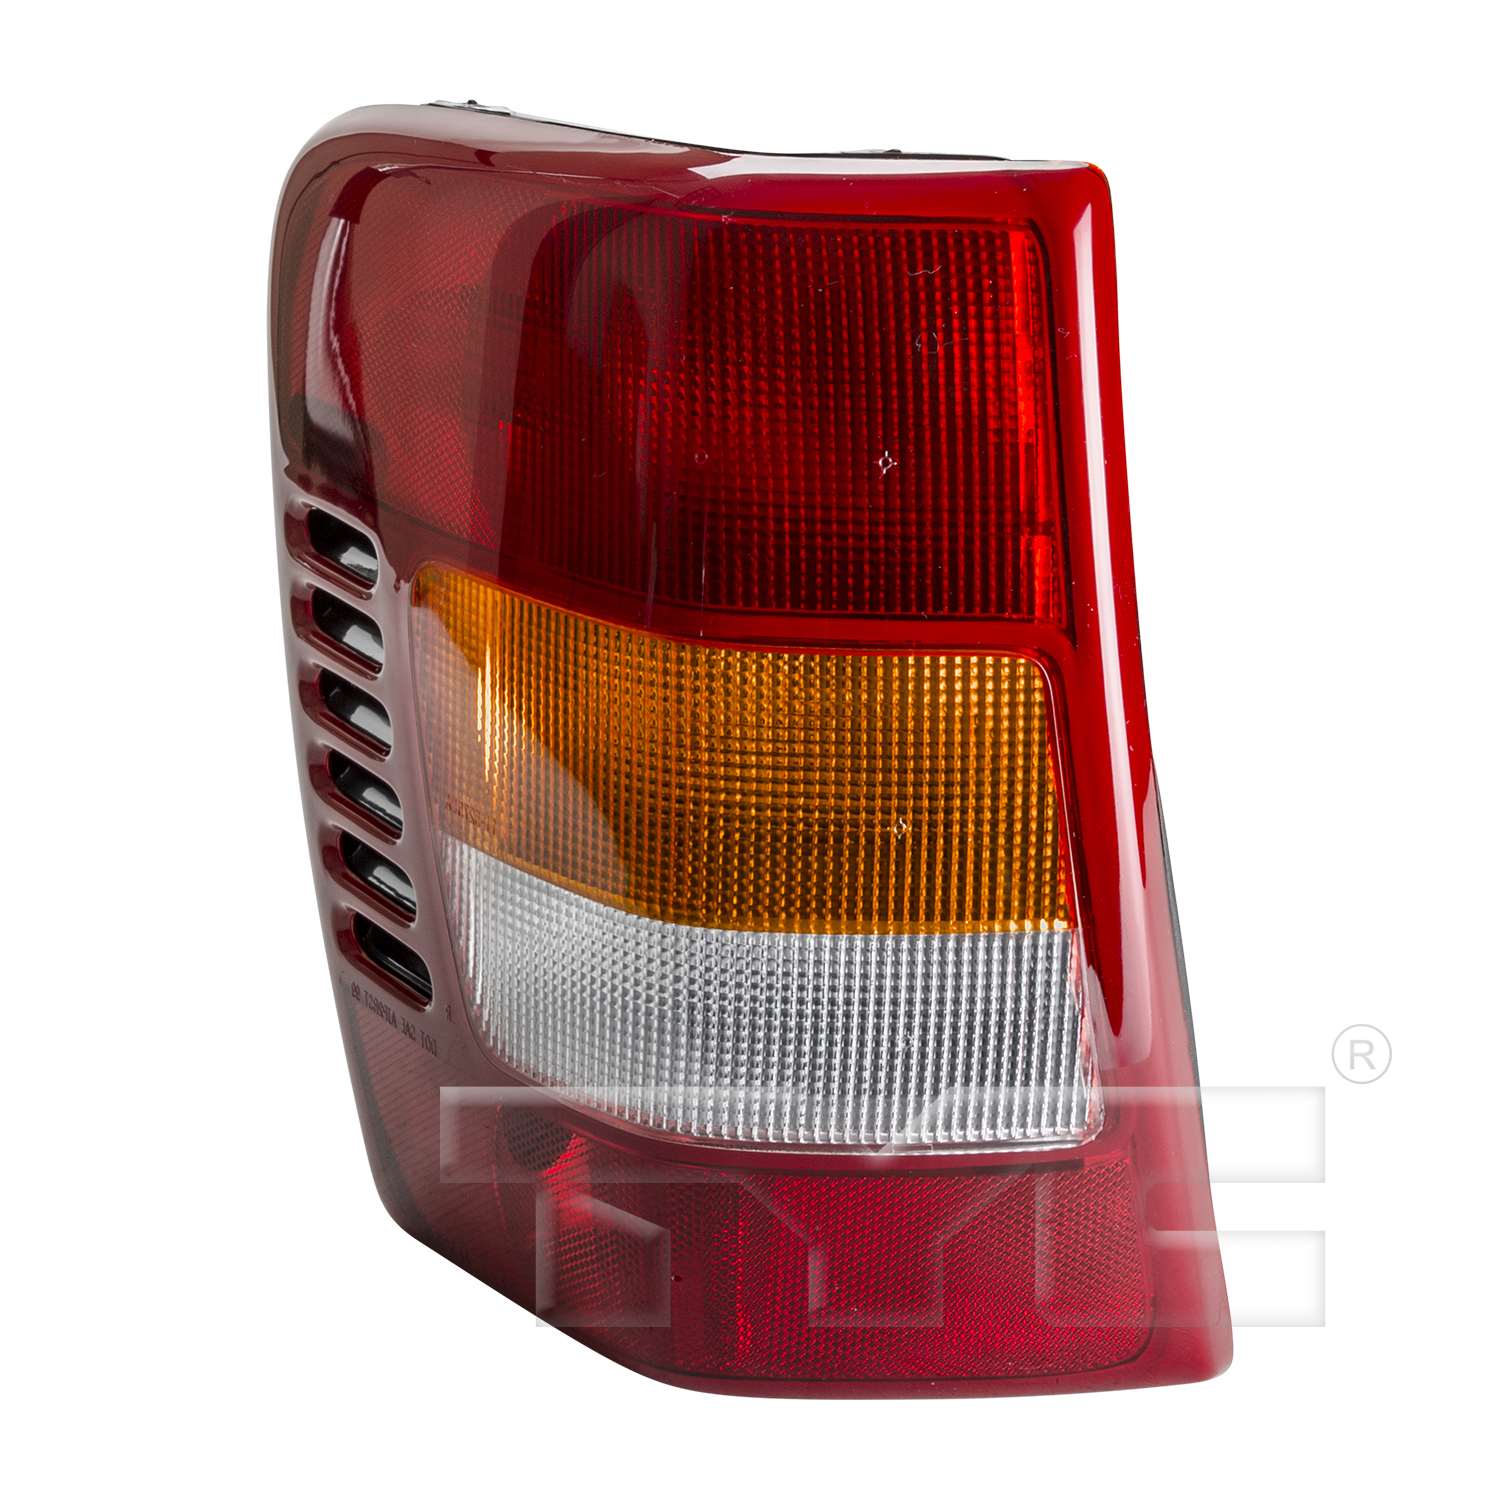 Aftermarket TAILLIGHTS for JEEP - GRAND CHEROKEE, GRAND CHEROKEE,99-02,LT Taillamp assy